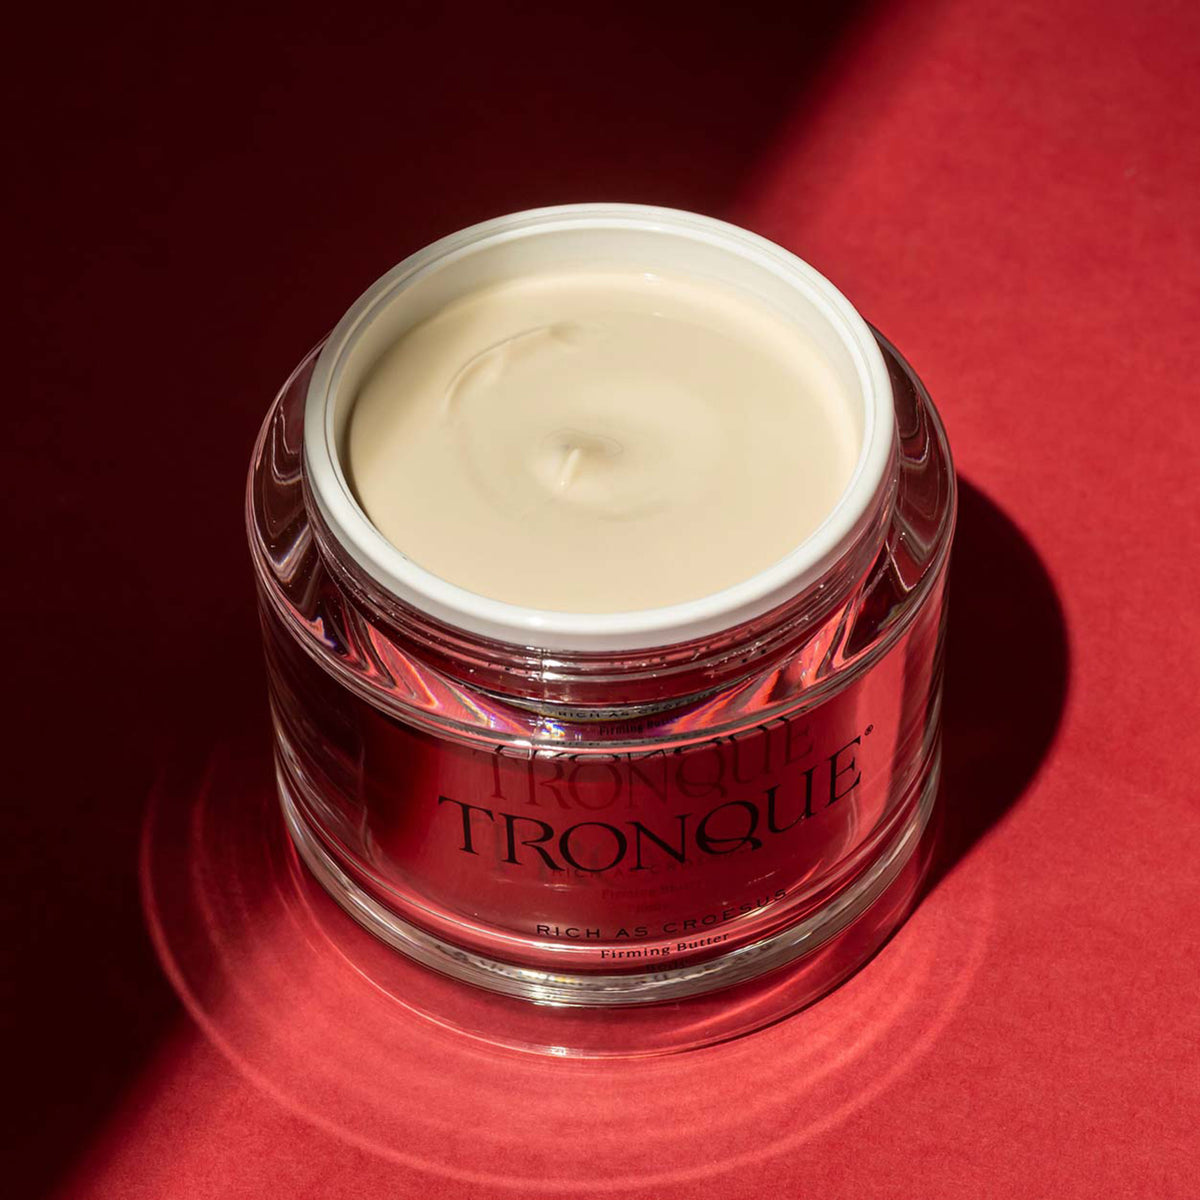 Tronque Firming Body Butter .